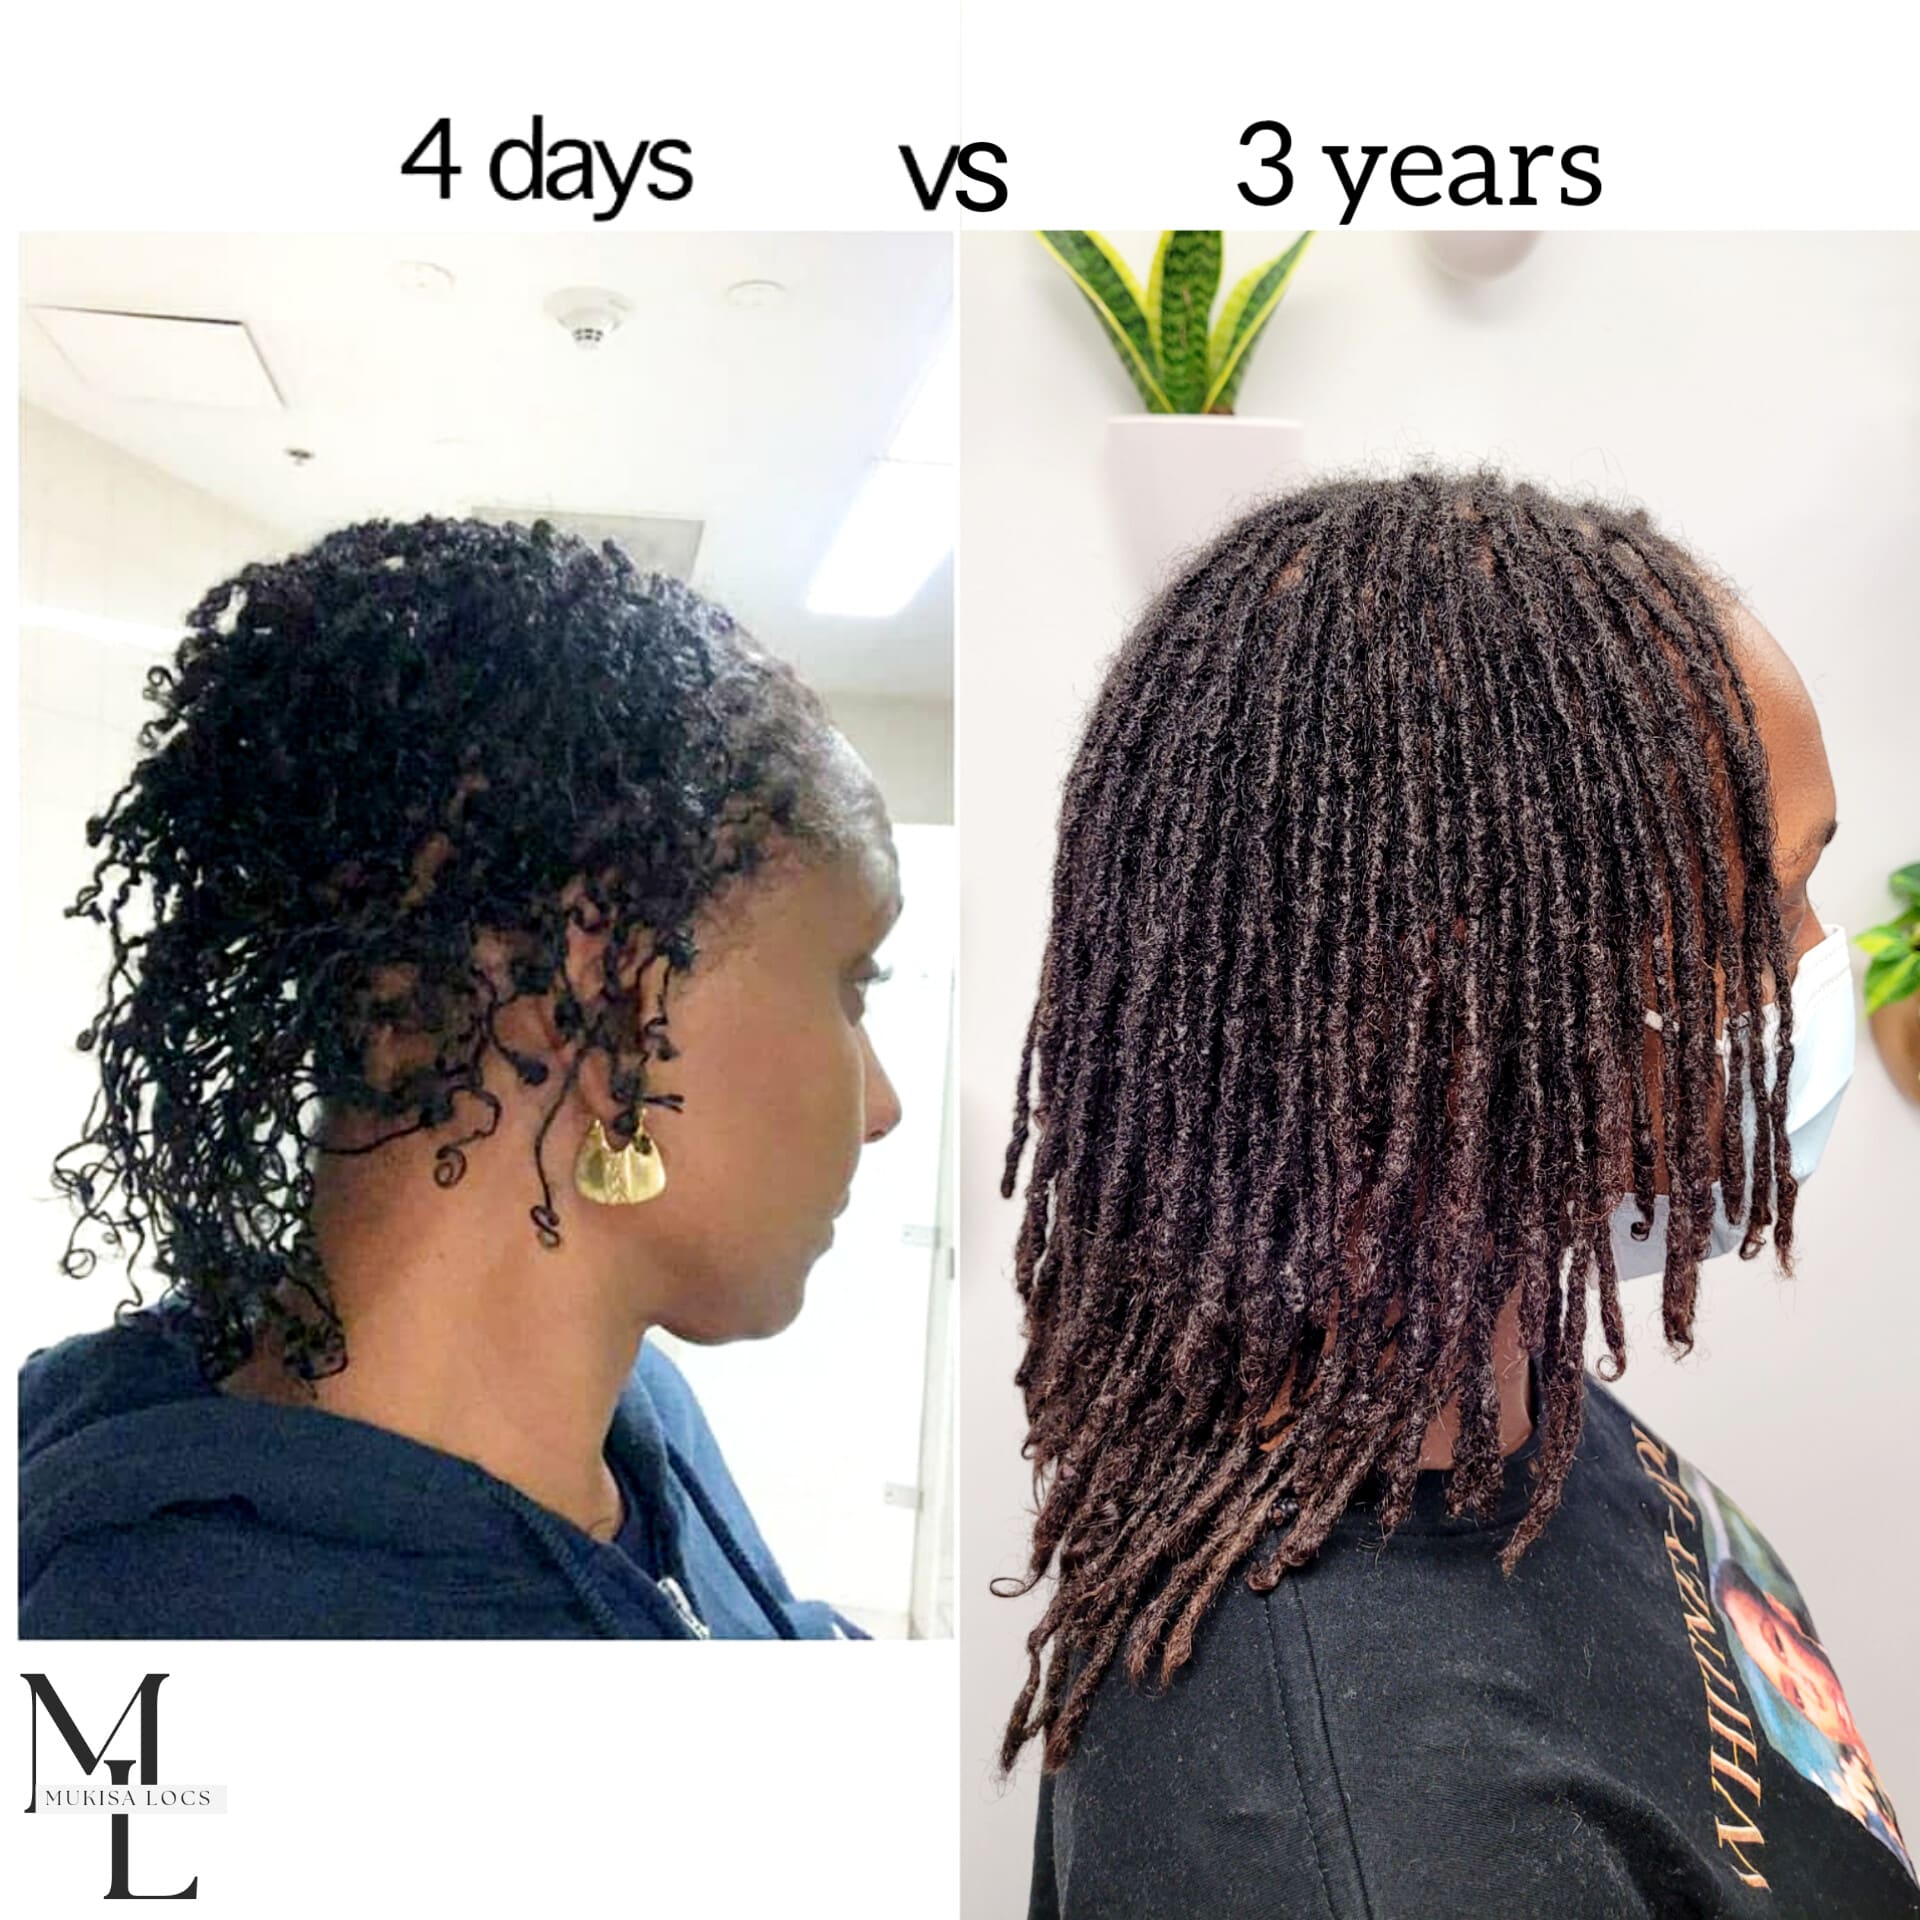 What is the Difference between Sisterlocks and Micro locs? – Mukisa Locs